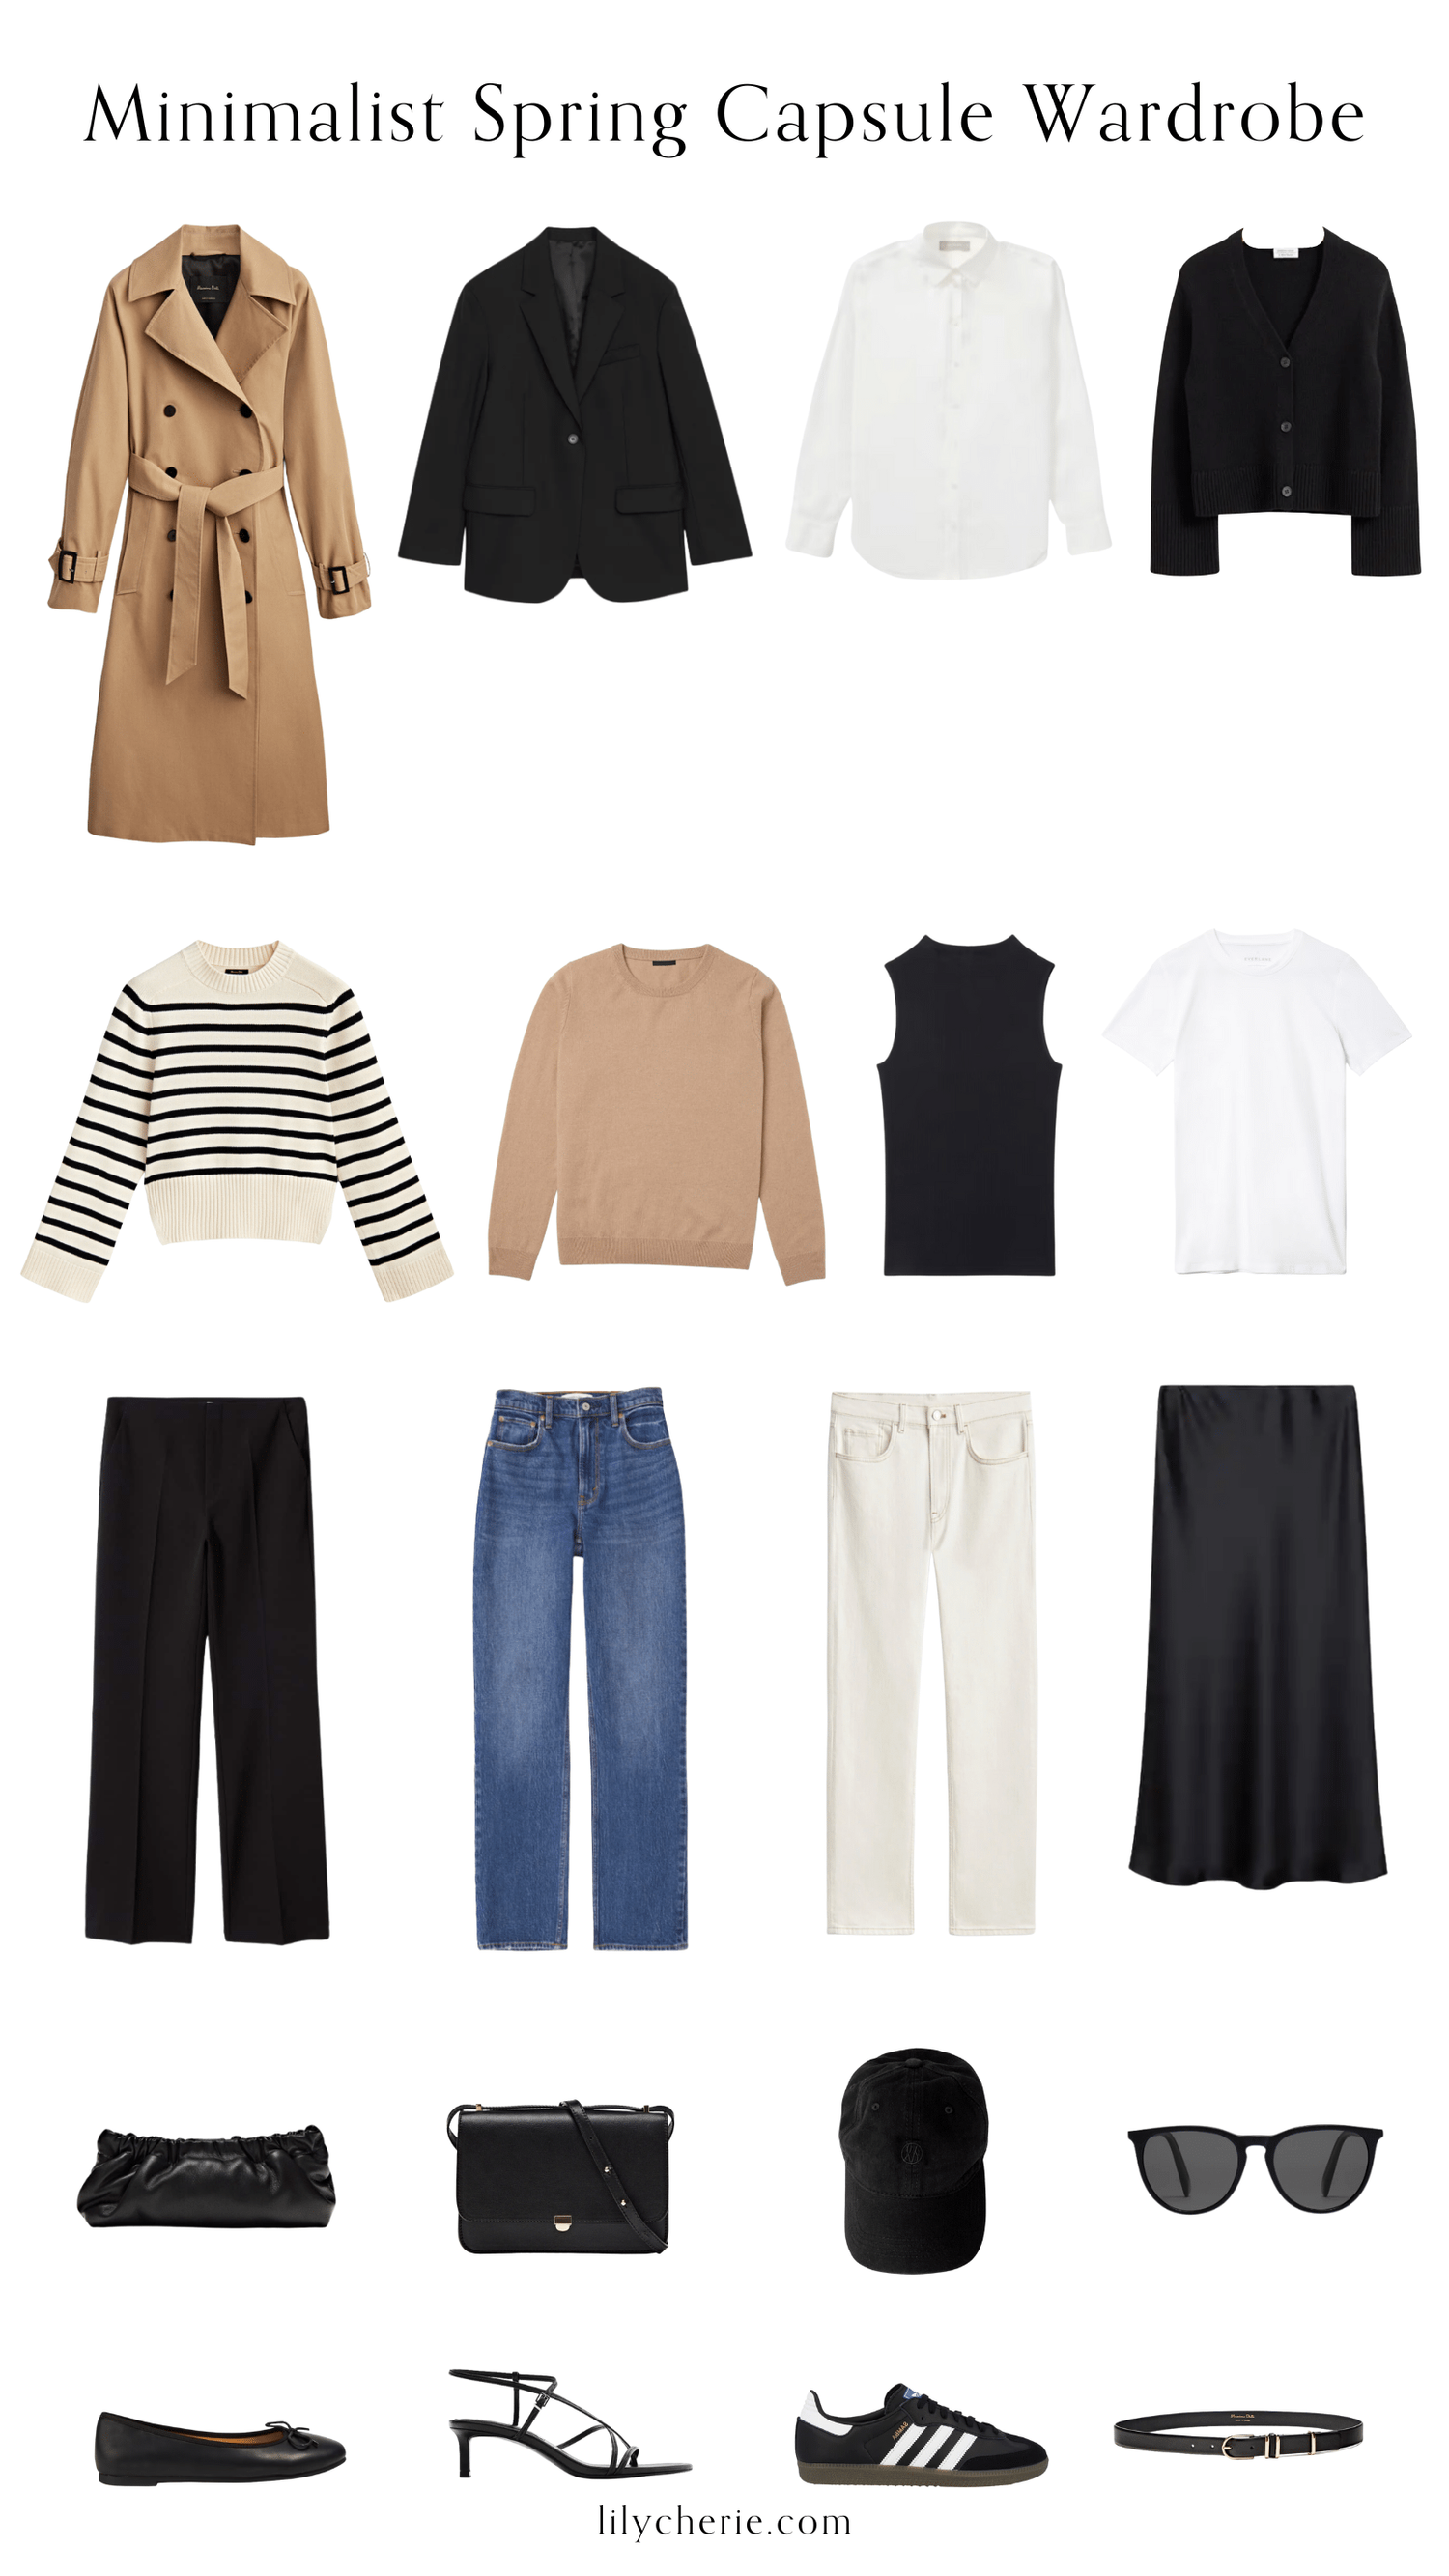 Spring Capsule Wardrobe for Midsize Women with Links